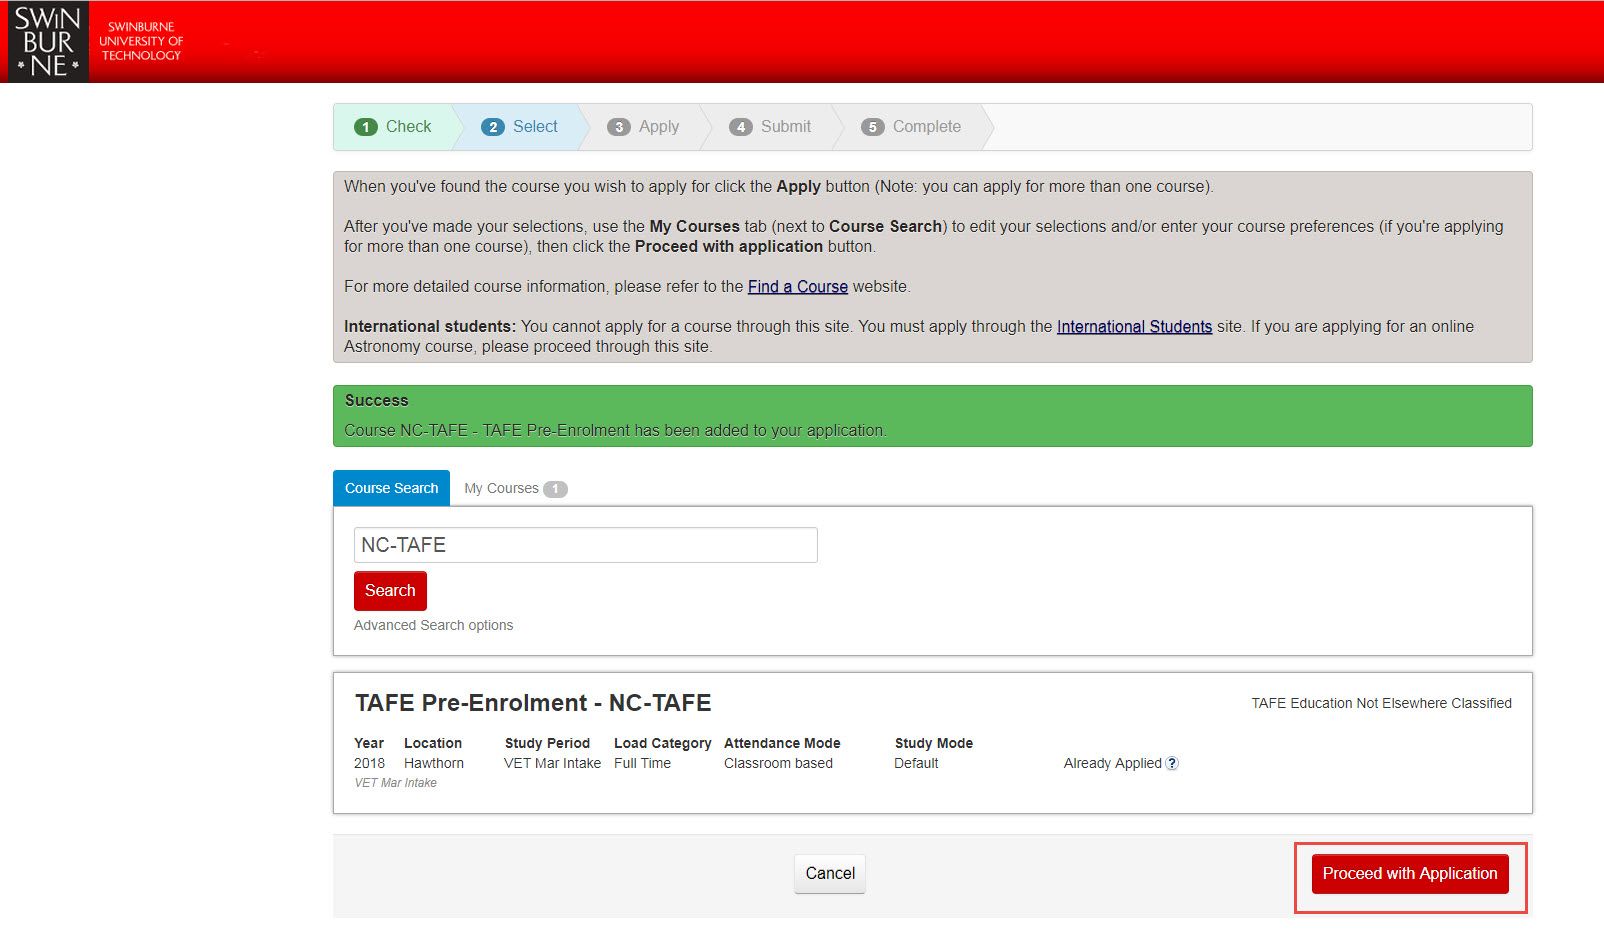 Screenshot of the Swinburne Applications website with TAFE Pre-Enrolment added to the application and a red ‘Proceed with Application’ button in the bottom right corner.